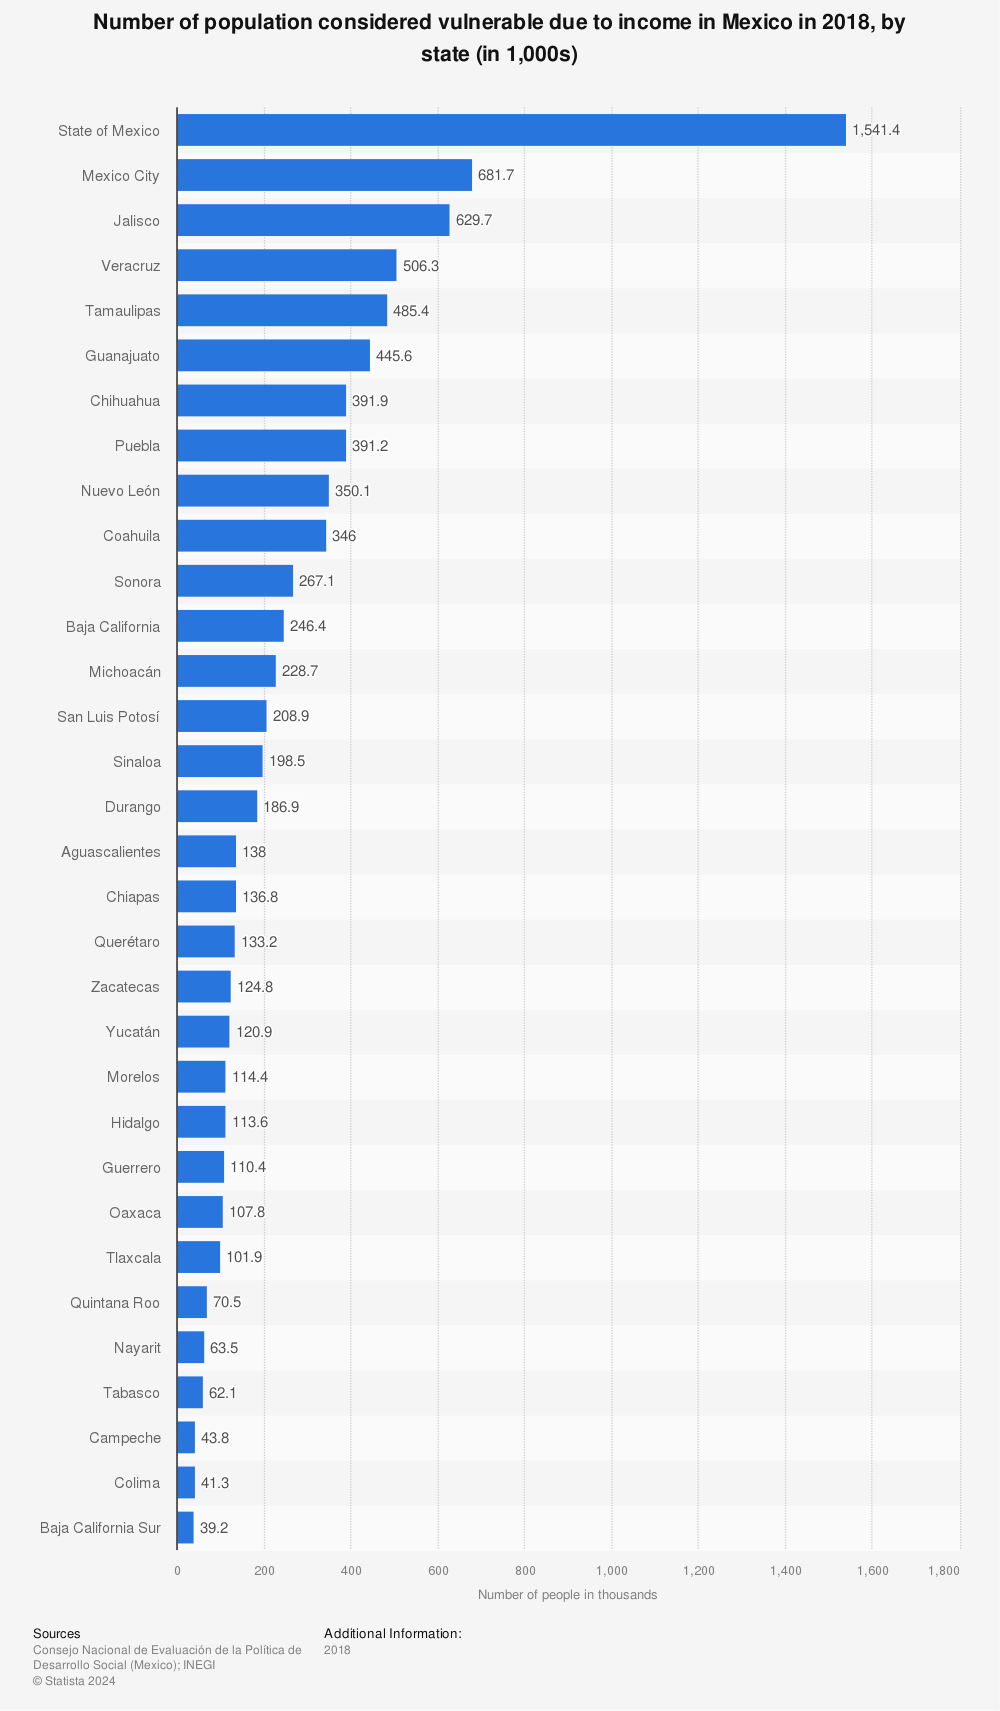 Statistic: Number of population considered vulnerable due to income in Mexico in 2018, by state (in 1,000s) | Statista